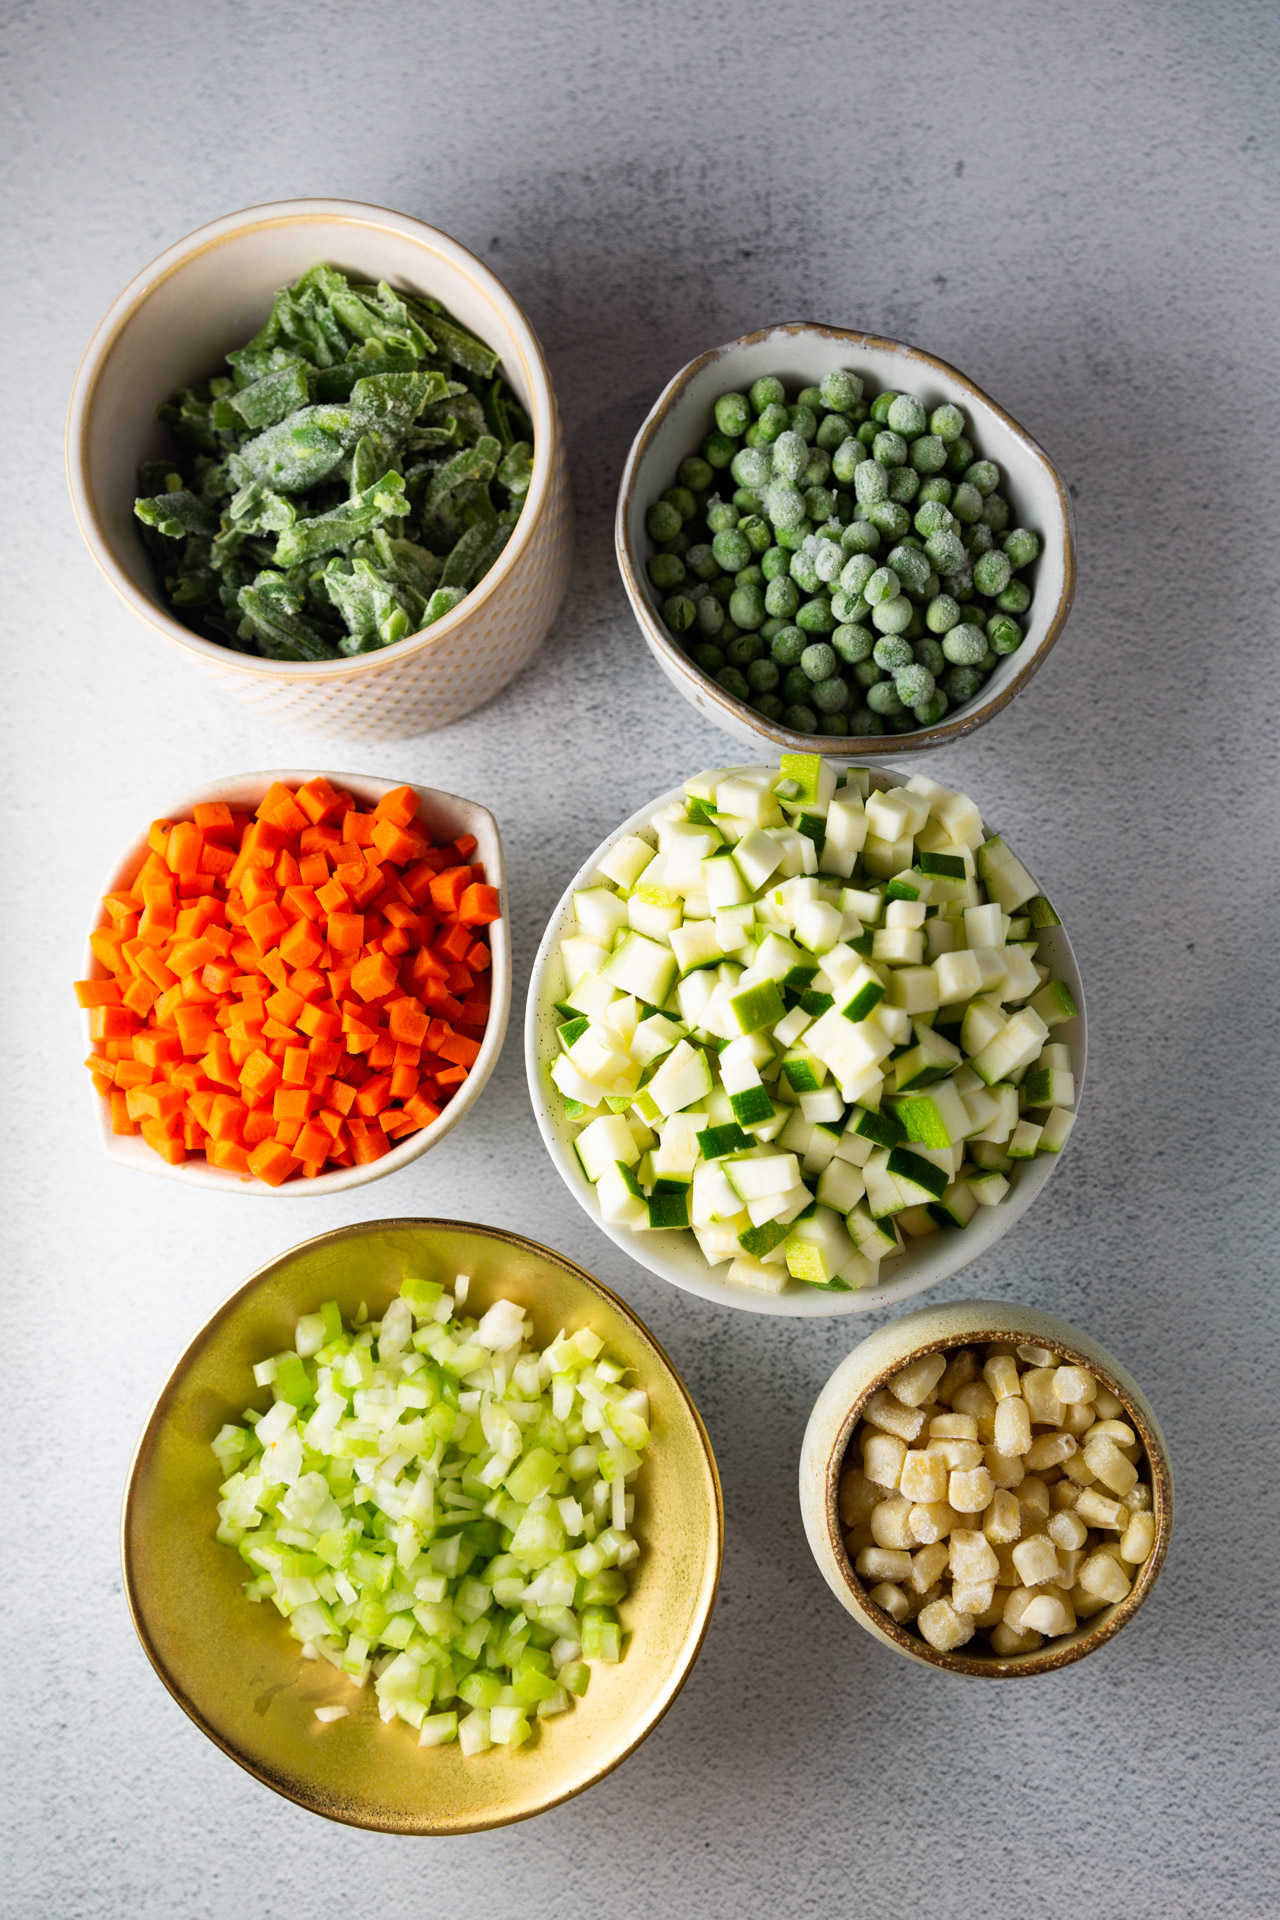 A variety of healthy vegetables in bowls on a table.